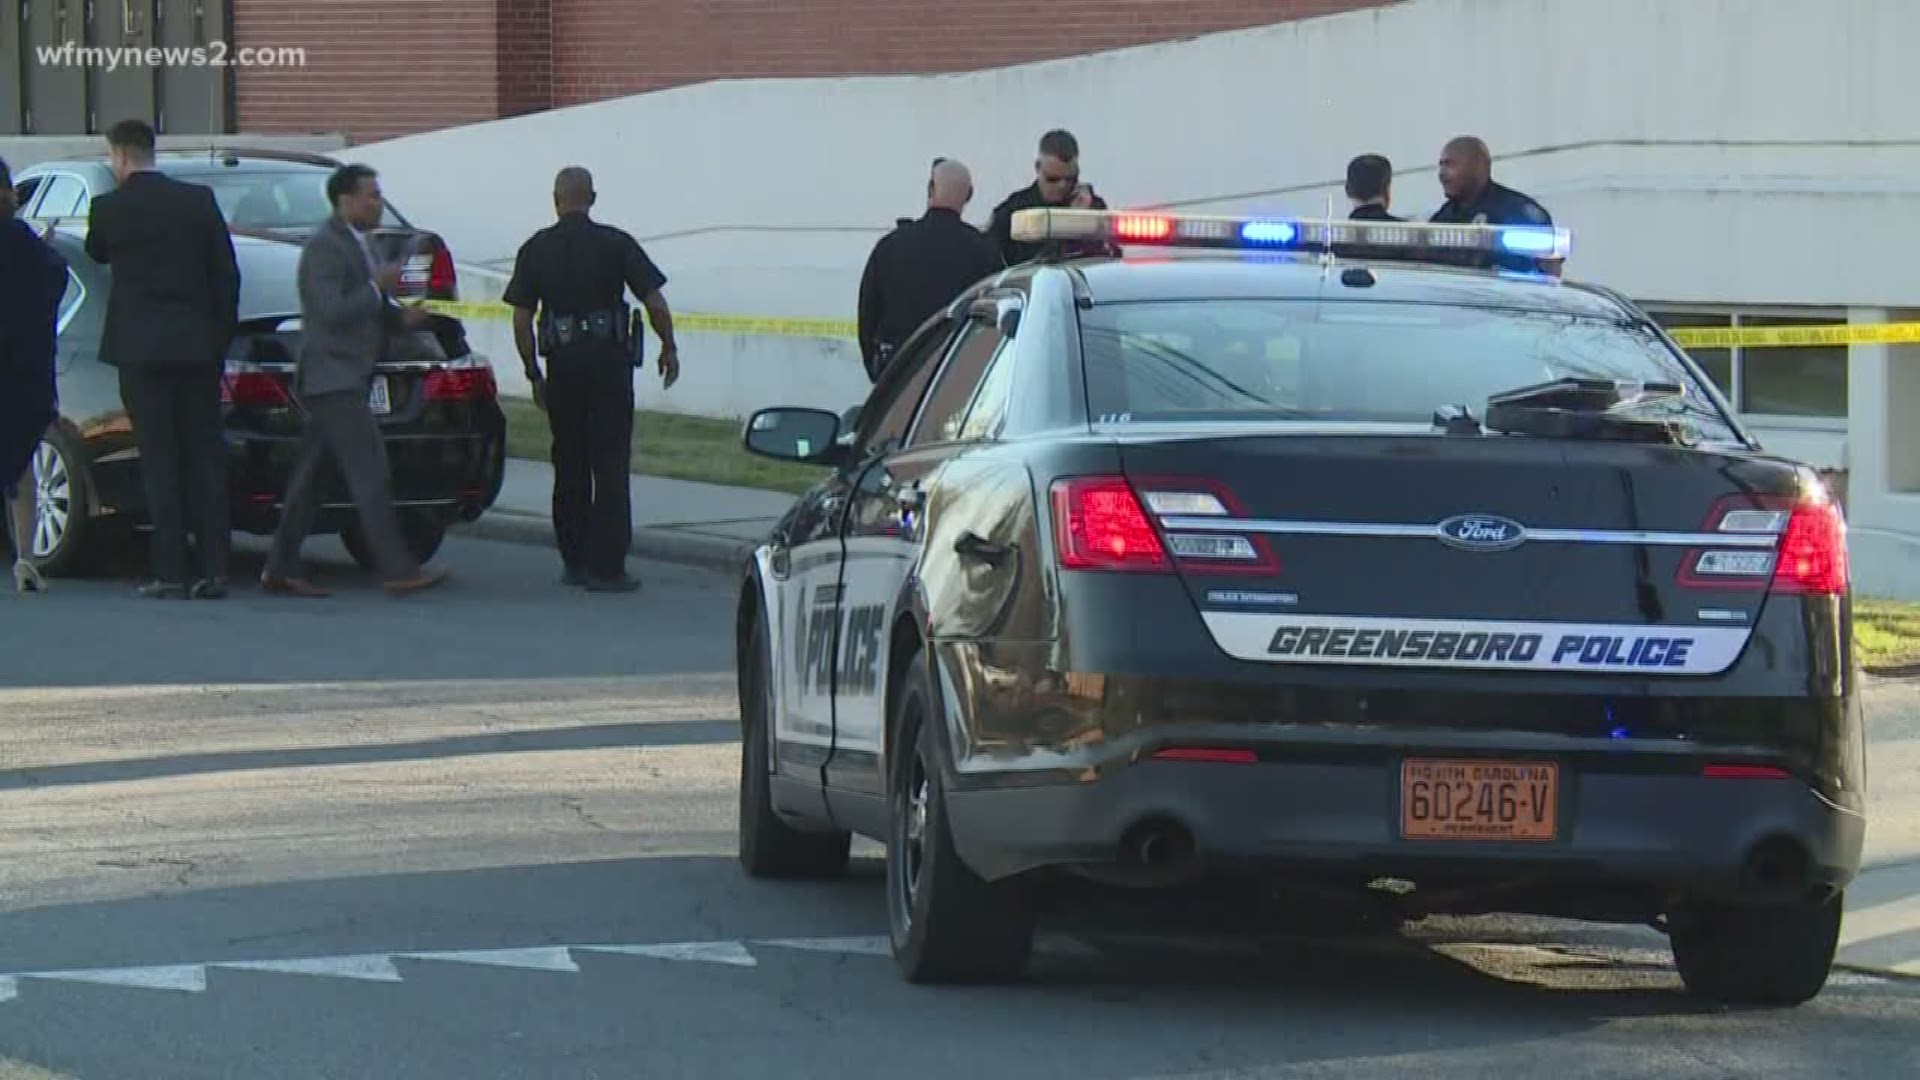 Greensboro Police responded to a shooting last night that led them right in front of the school.
We don't know the identity of the victim or the motive but WFMY News 2's Erica Stapleton is working to piece it all together.